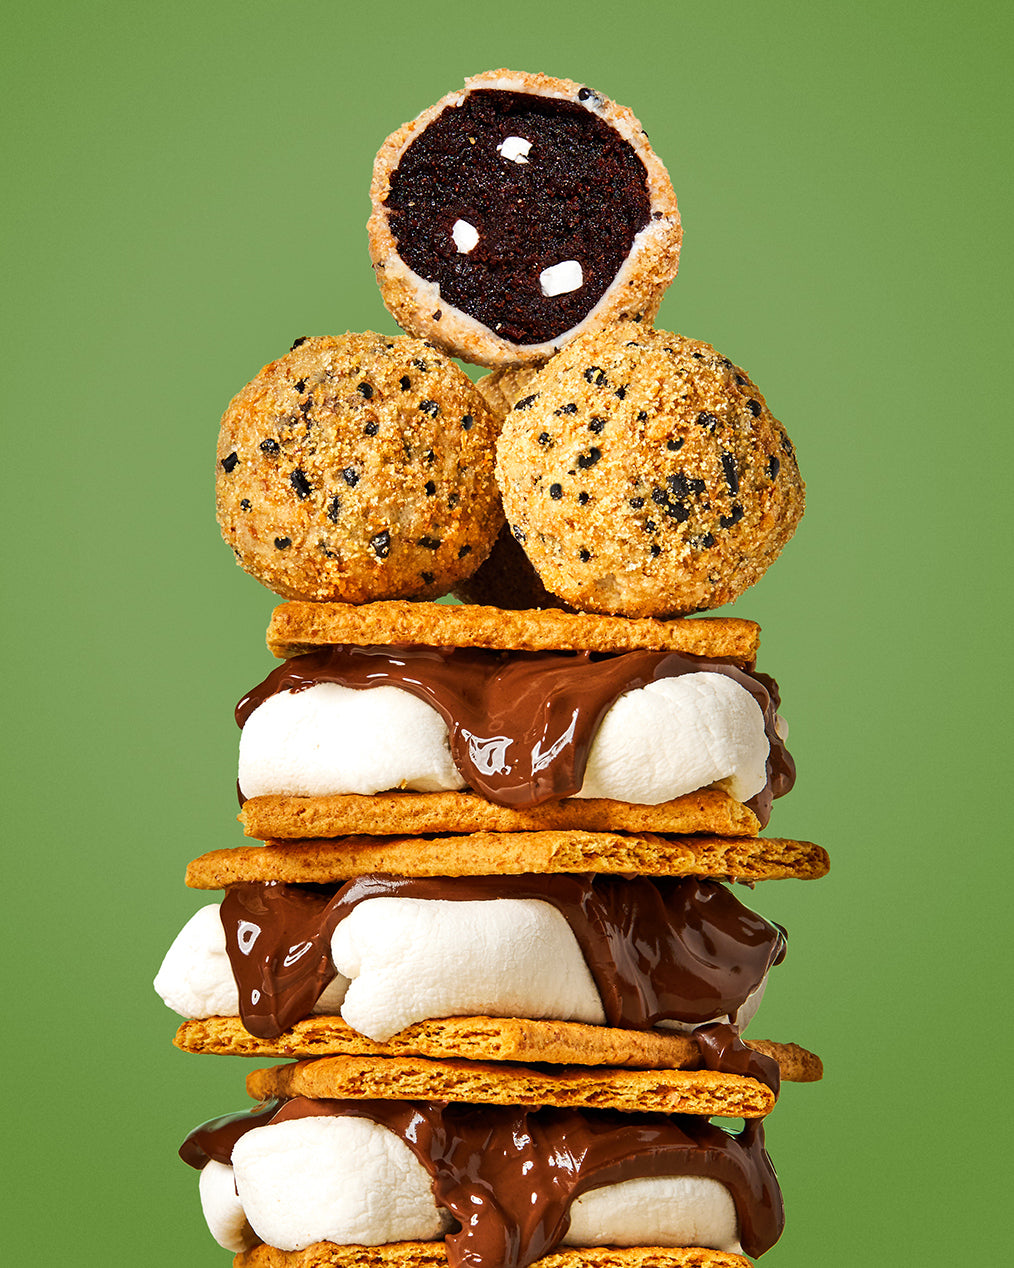 A stack of 3 gooey s'mores with three limited-time s'mores cake truffles nestled at the top.